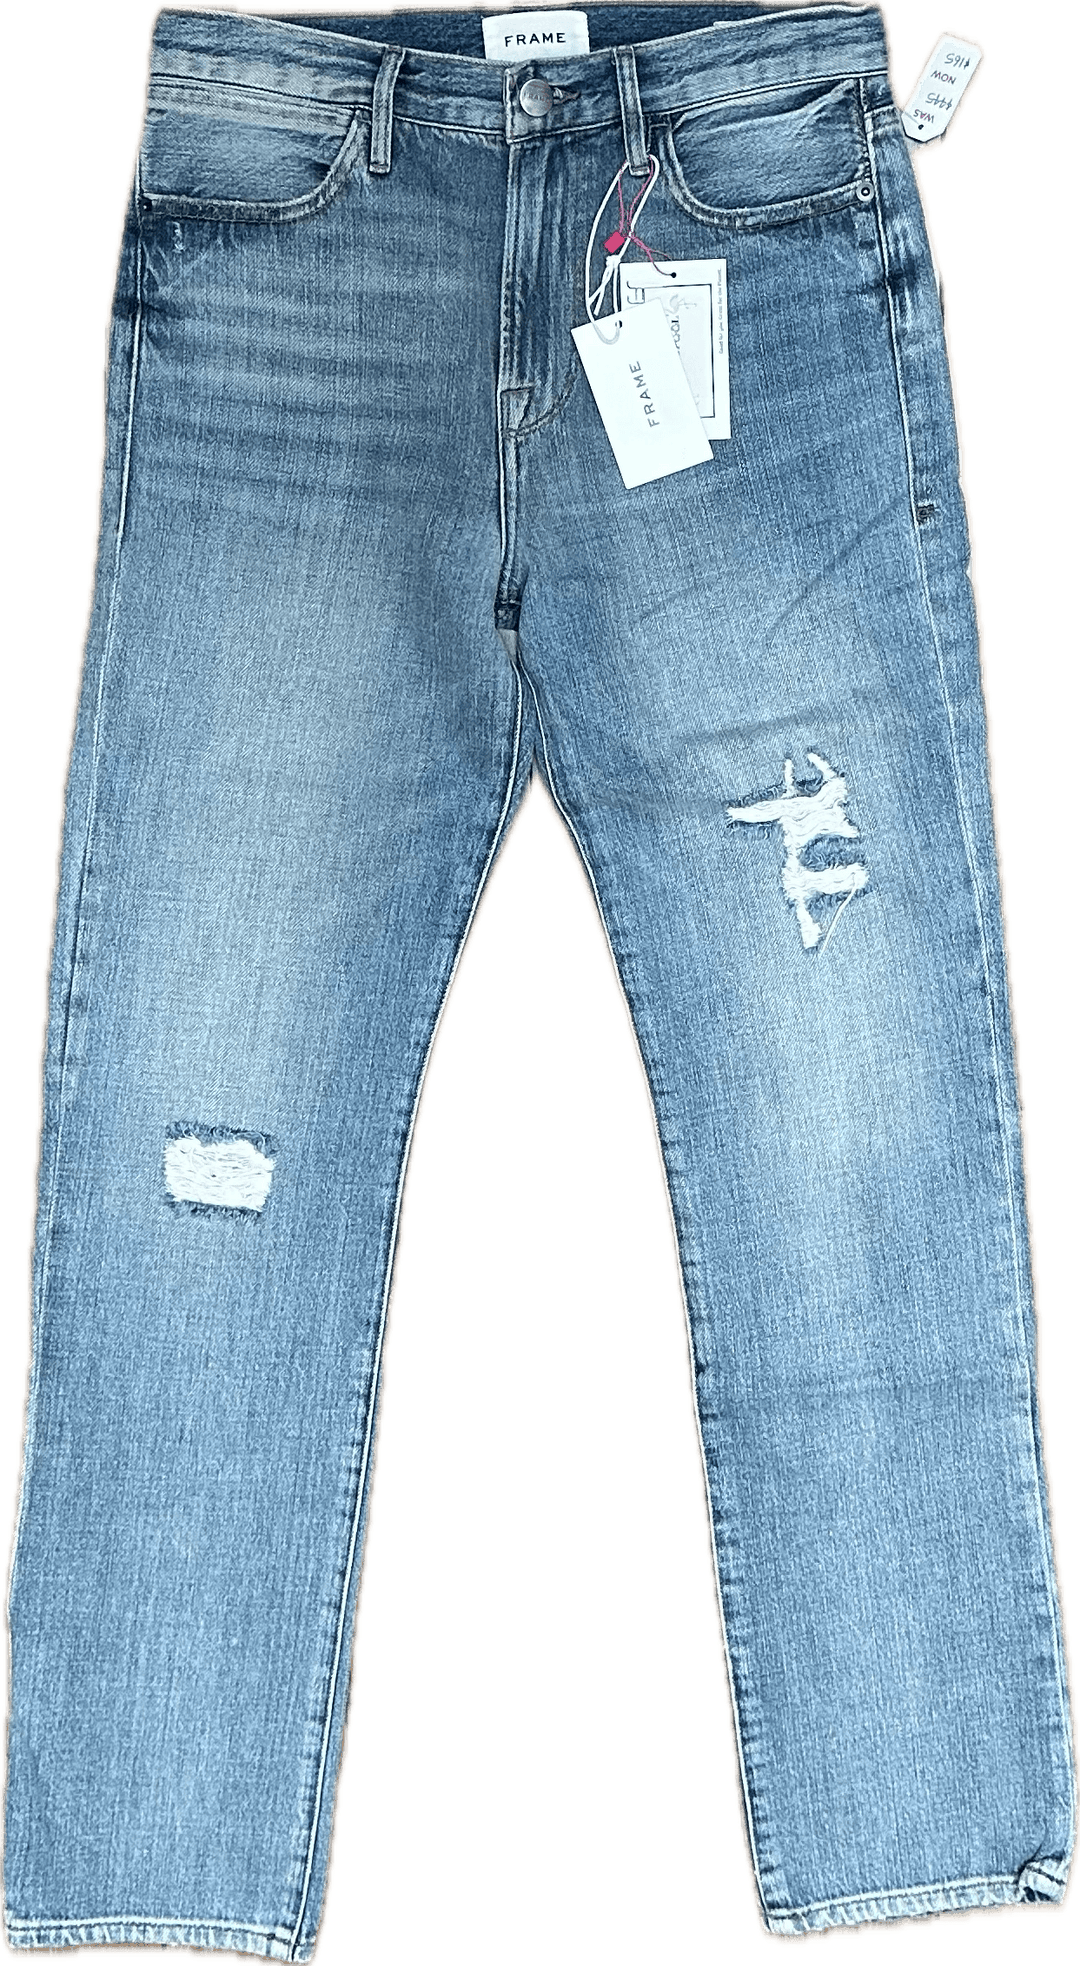 NWT- Frame Denim 'Le Hollywood' Straight Distressed Jeans RRP $445 -Size 25 - Jean Pool